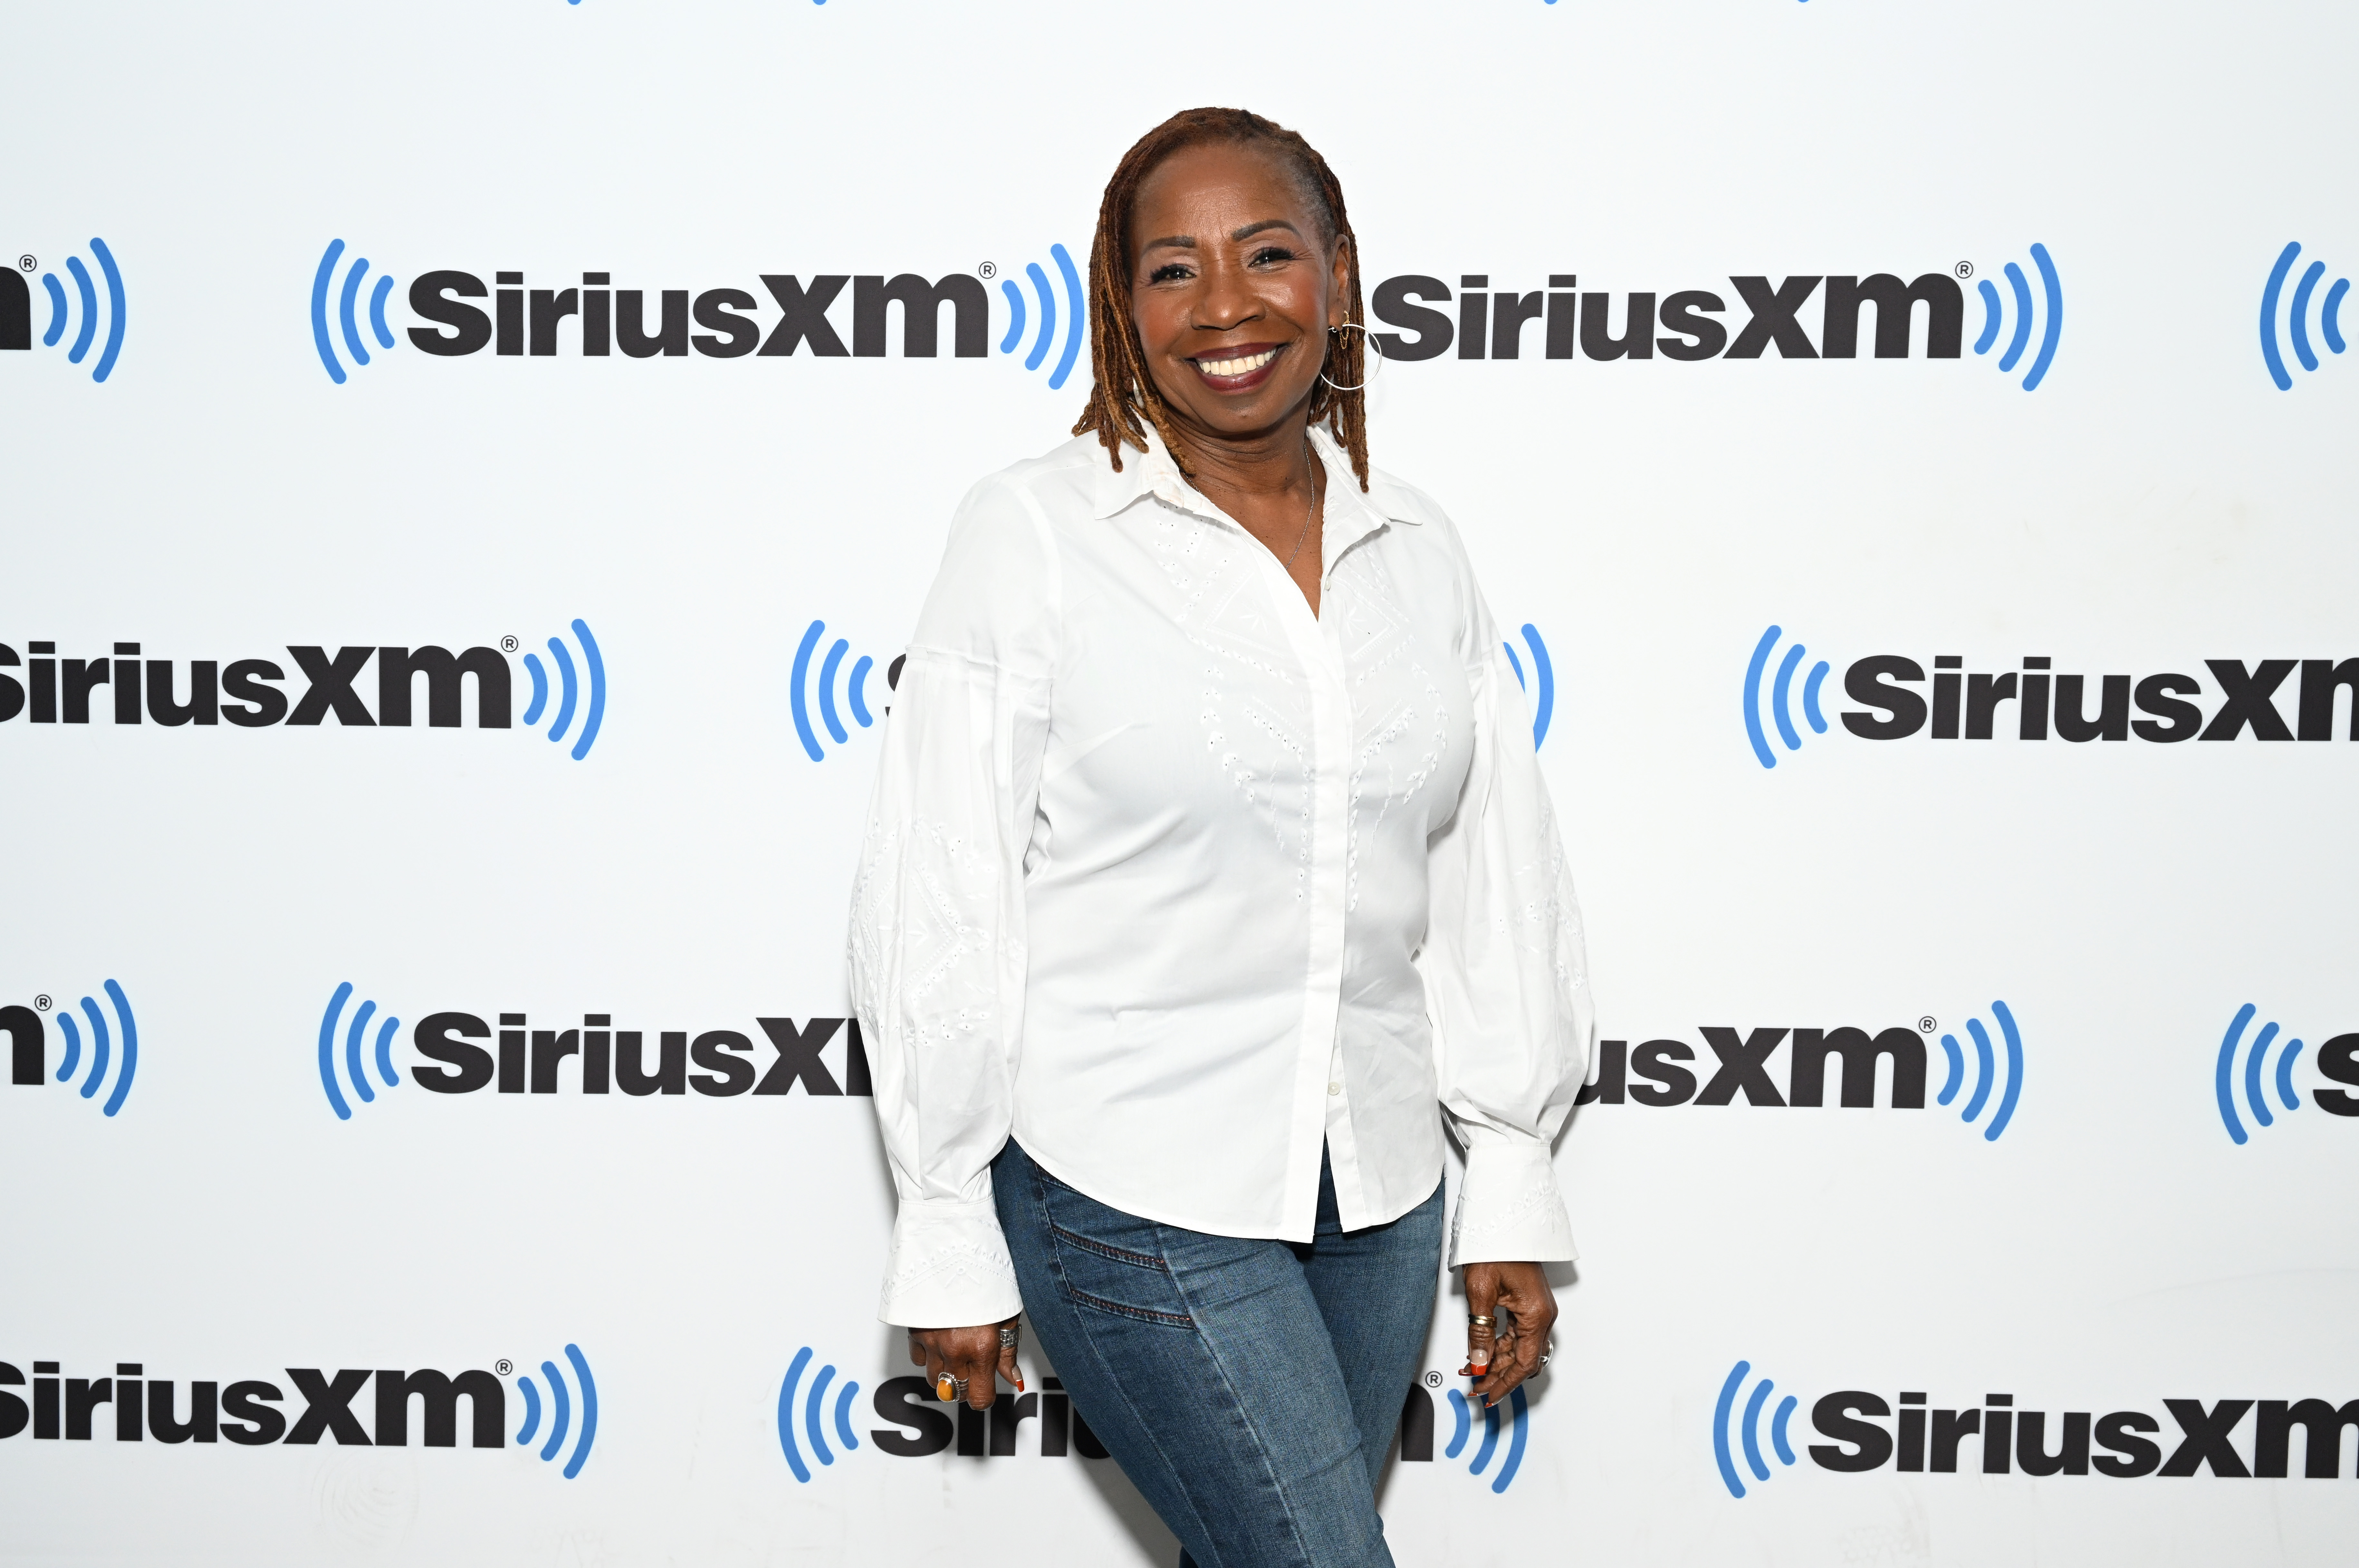 Iyanla Vanzant at SiriusXM Studios on March 21, 2023, in New York City. | Source: Getty Images